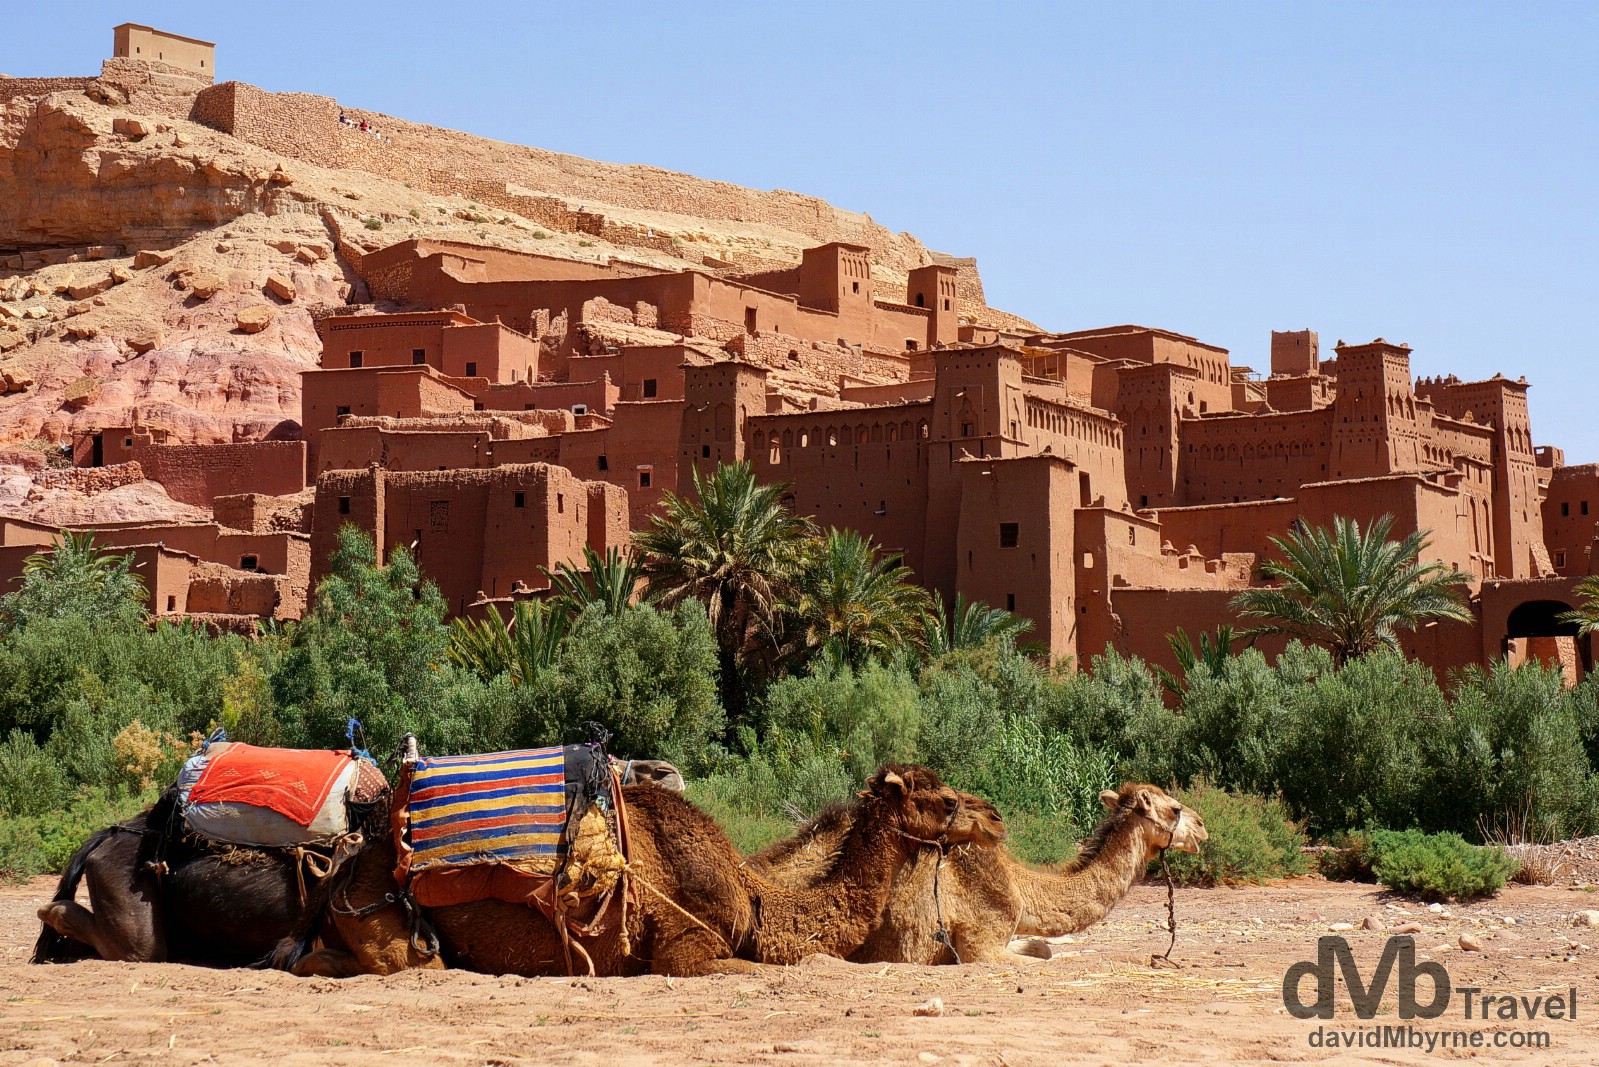 Camels resting in the Parched Oued Ounila riverbed fronting the UNESCO-listed Ait Benhaddou in southern Morocco. May 14th, 2014.